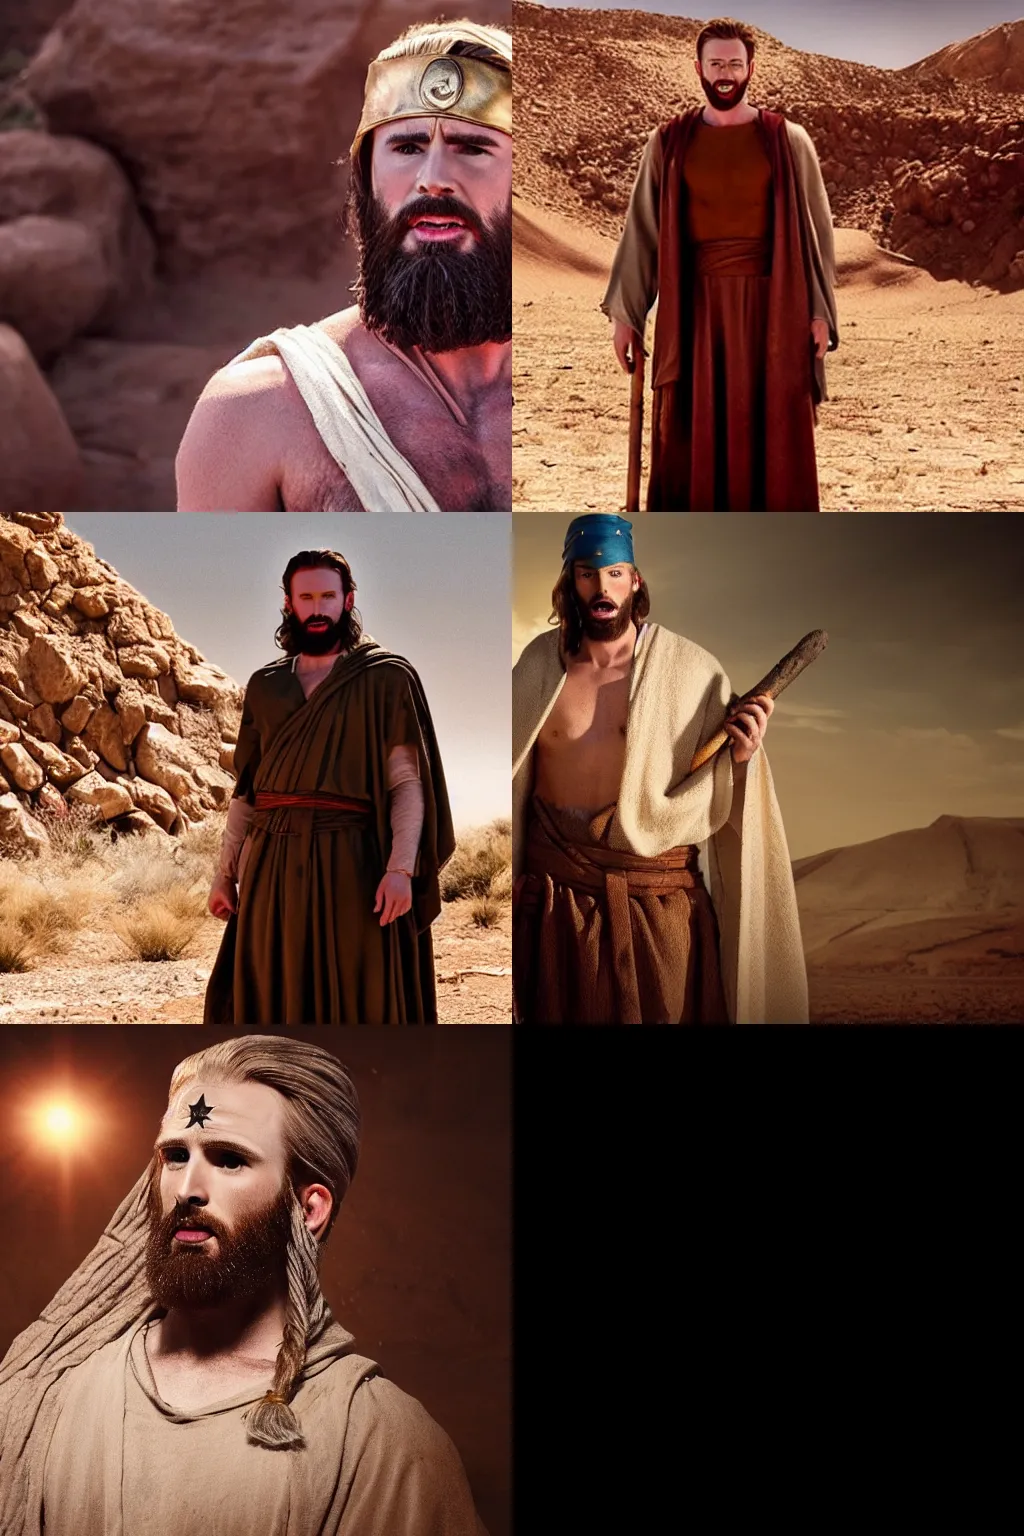 Prompt: photo of Chris Evans dressed up like moses from the bible, cinematic lighting, desert background